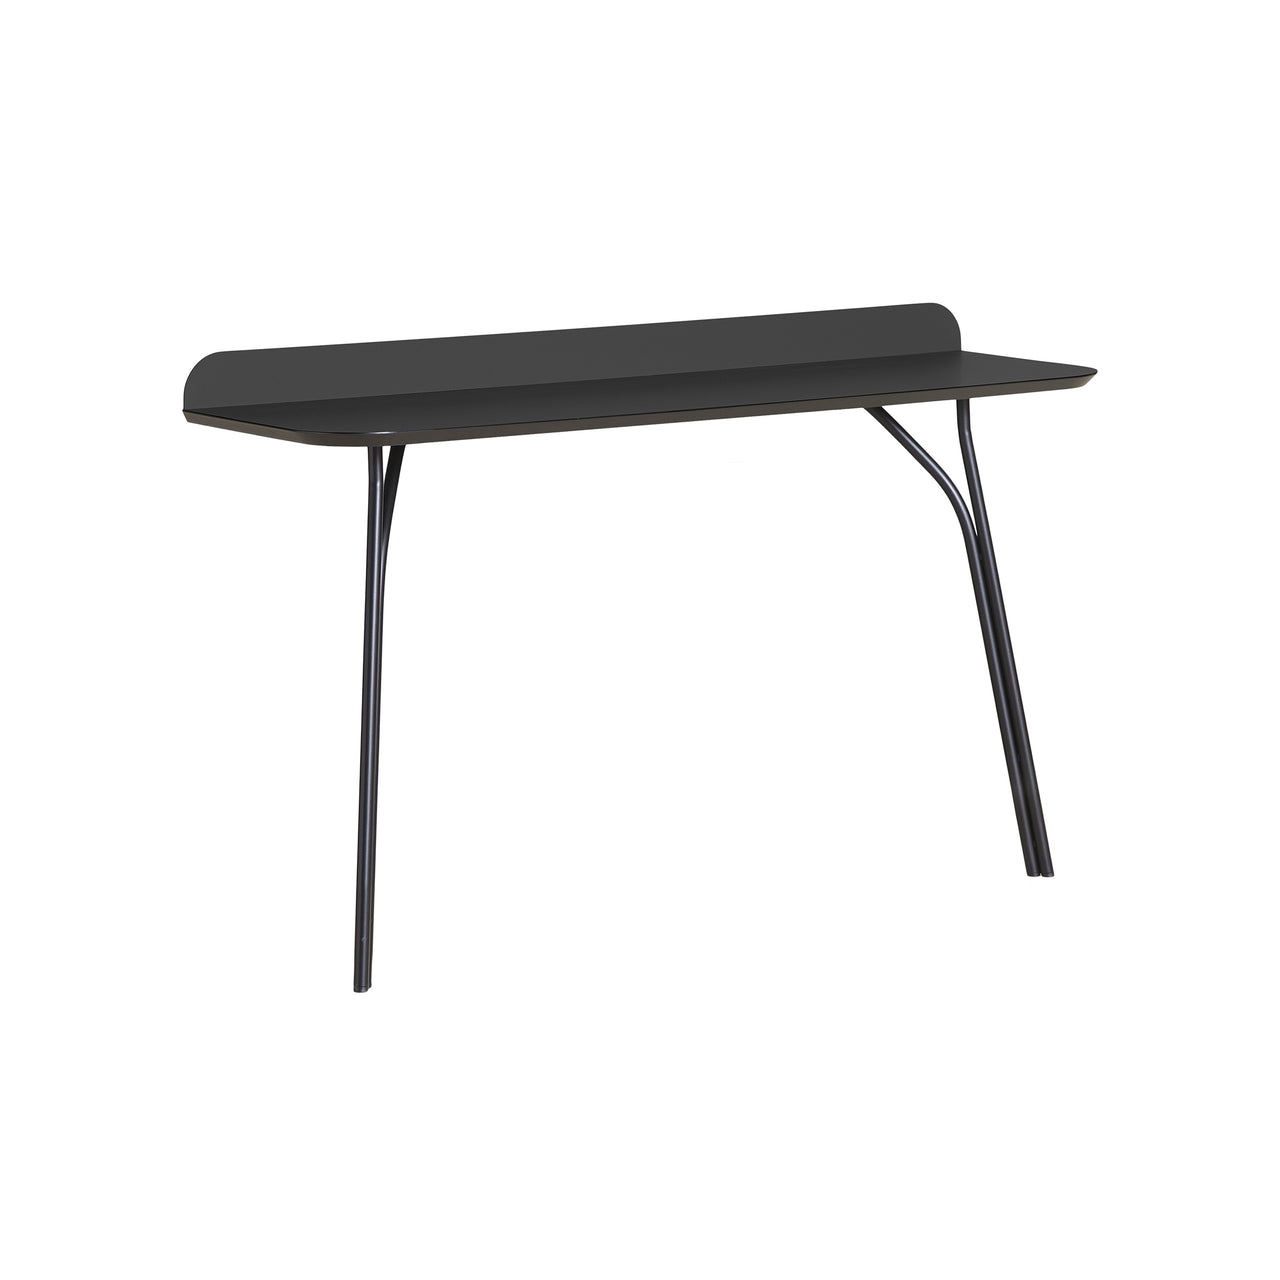 Tree Console Table: Low + Charcoal Black + Without Shelf